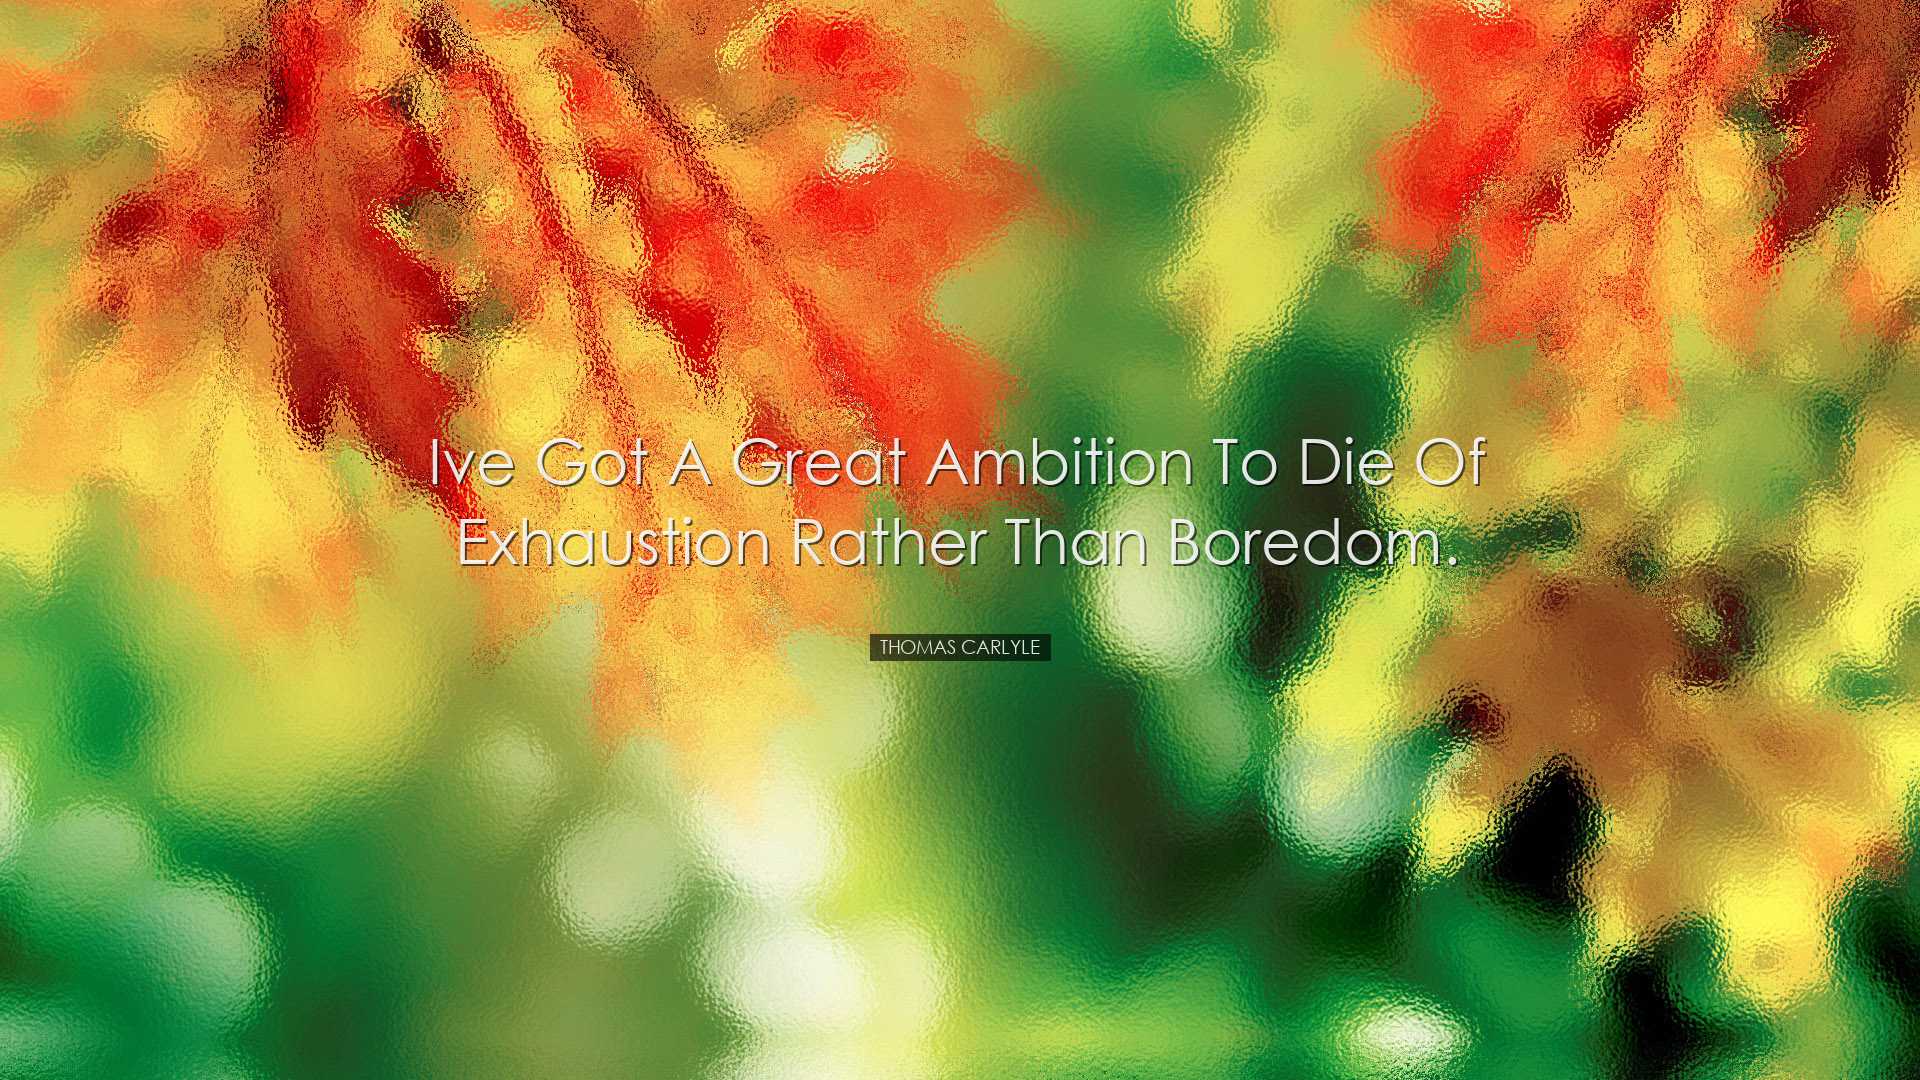 Ive got a great ambition to die of exhaustion rather than boredom.